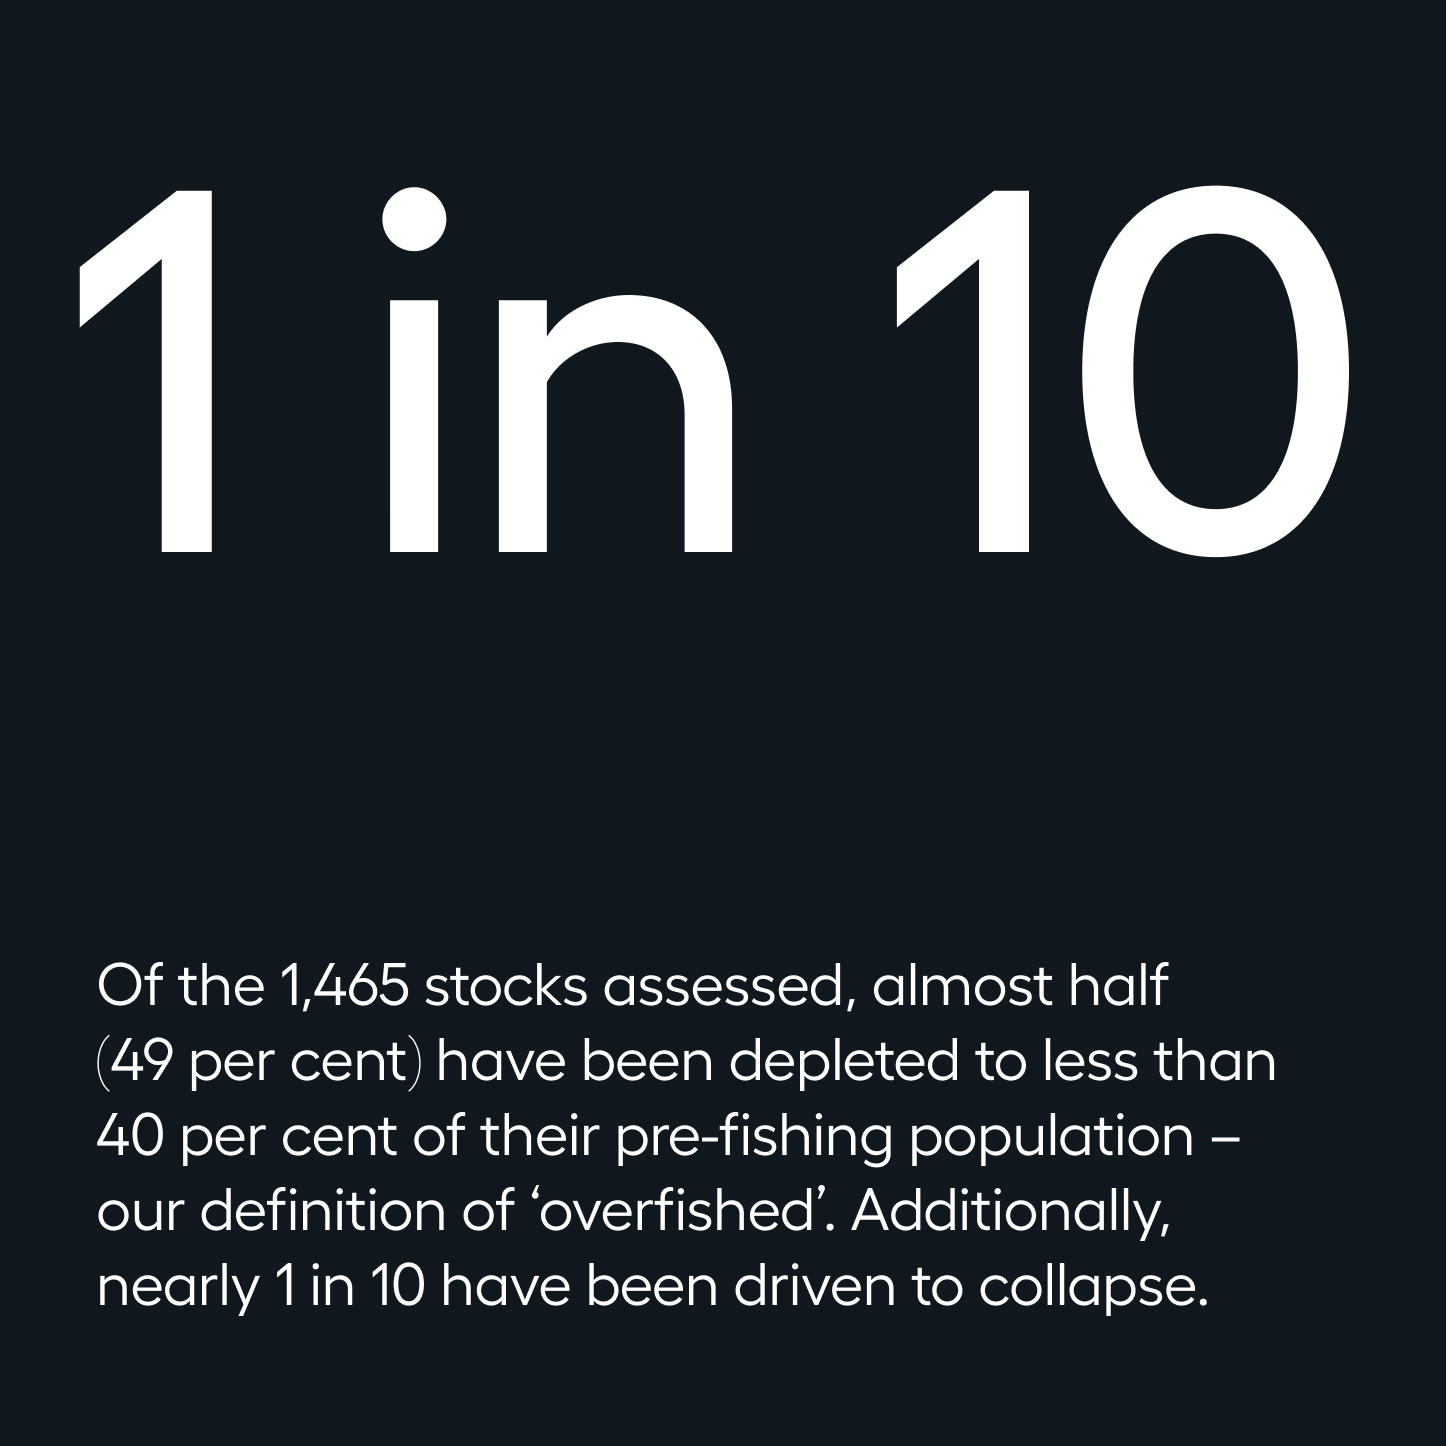 Black background with white copy that raises awareness about how almost half of fishing stocks have been depleted from over fishing.